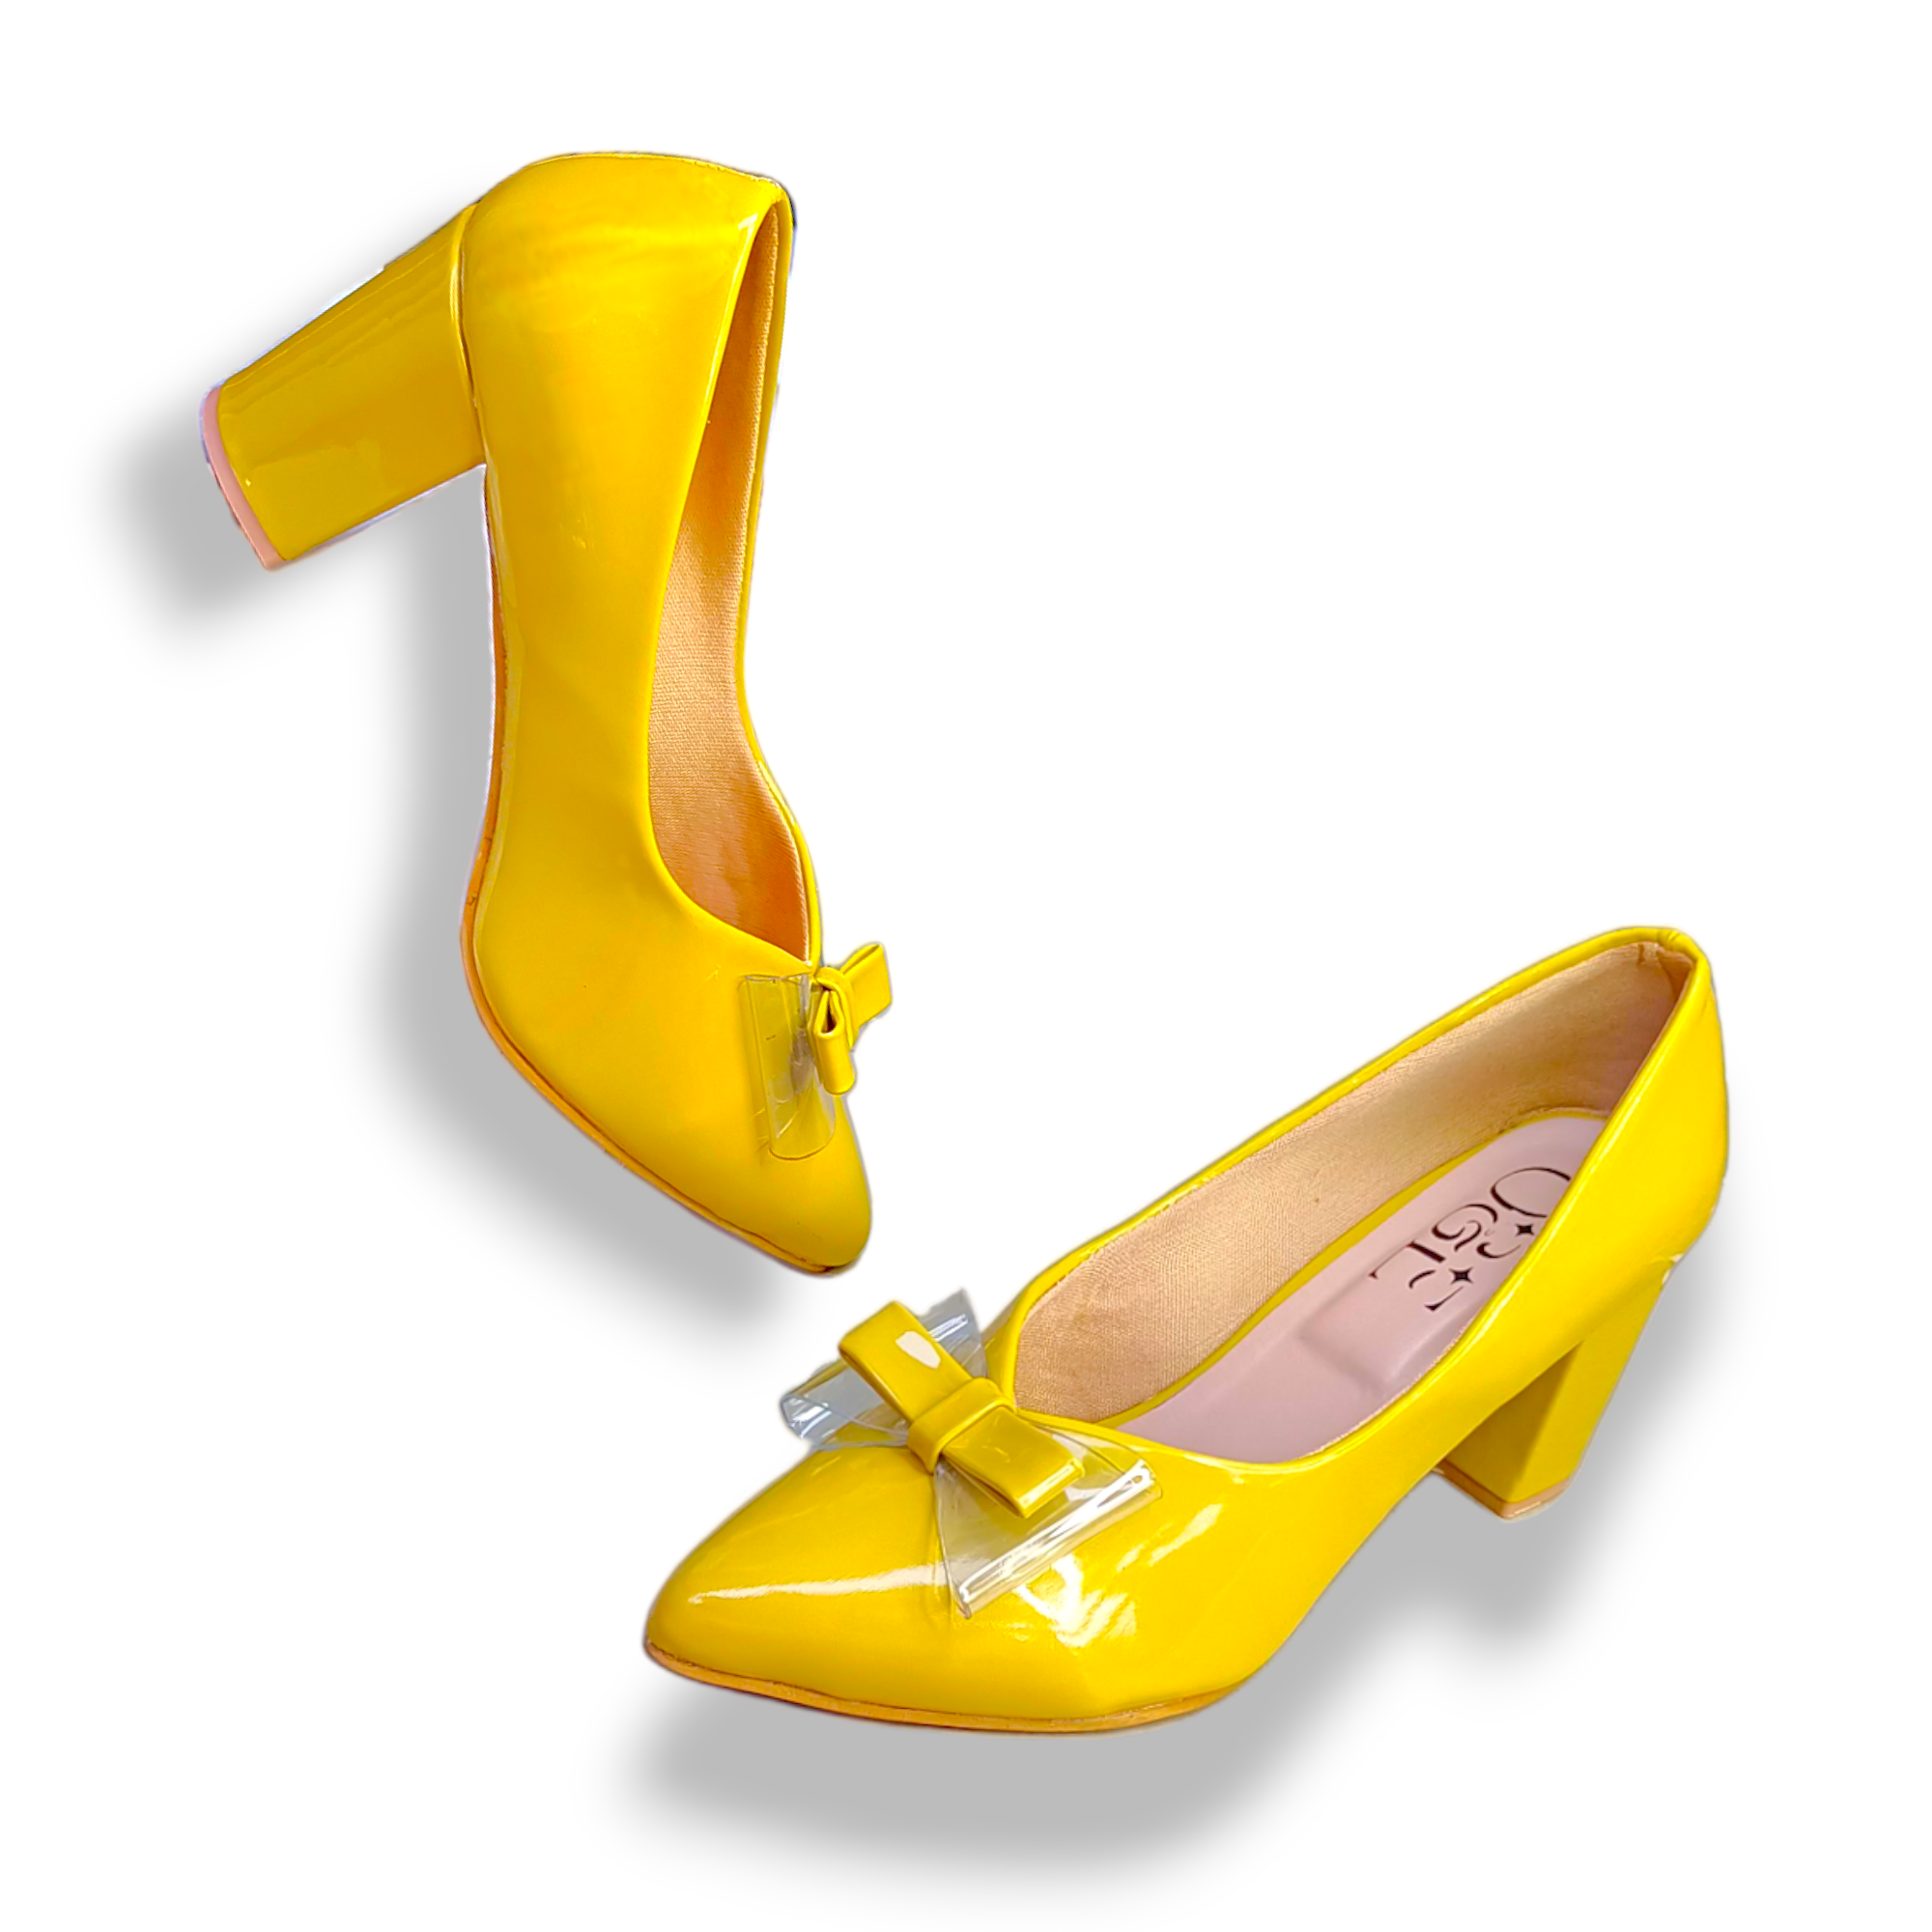 Chanel Mustard Yellow Pearl T-Strap Heels - 38 – I MISS YOU VINTAGE